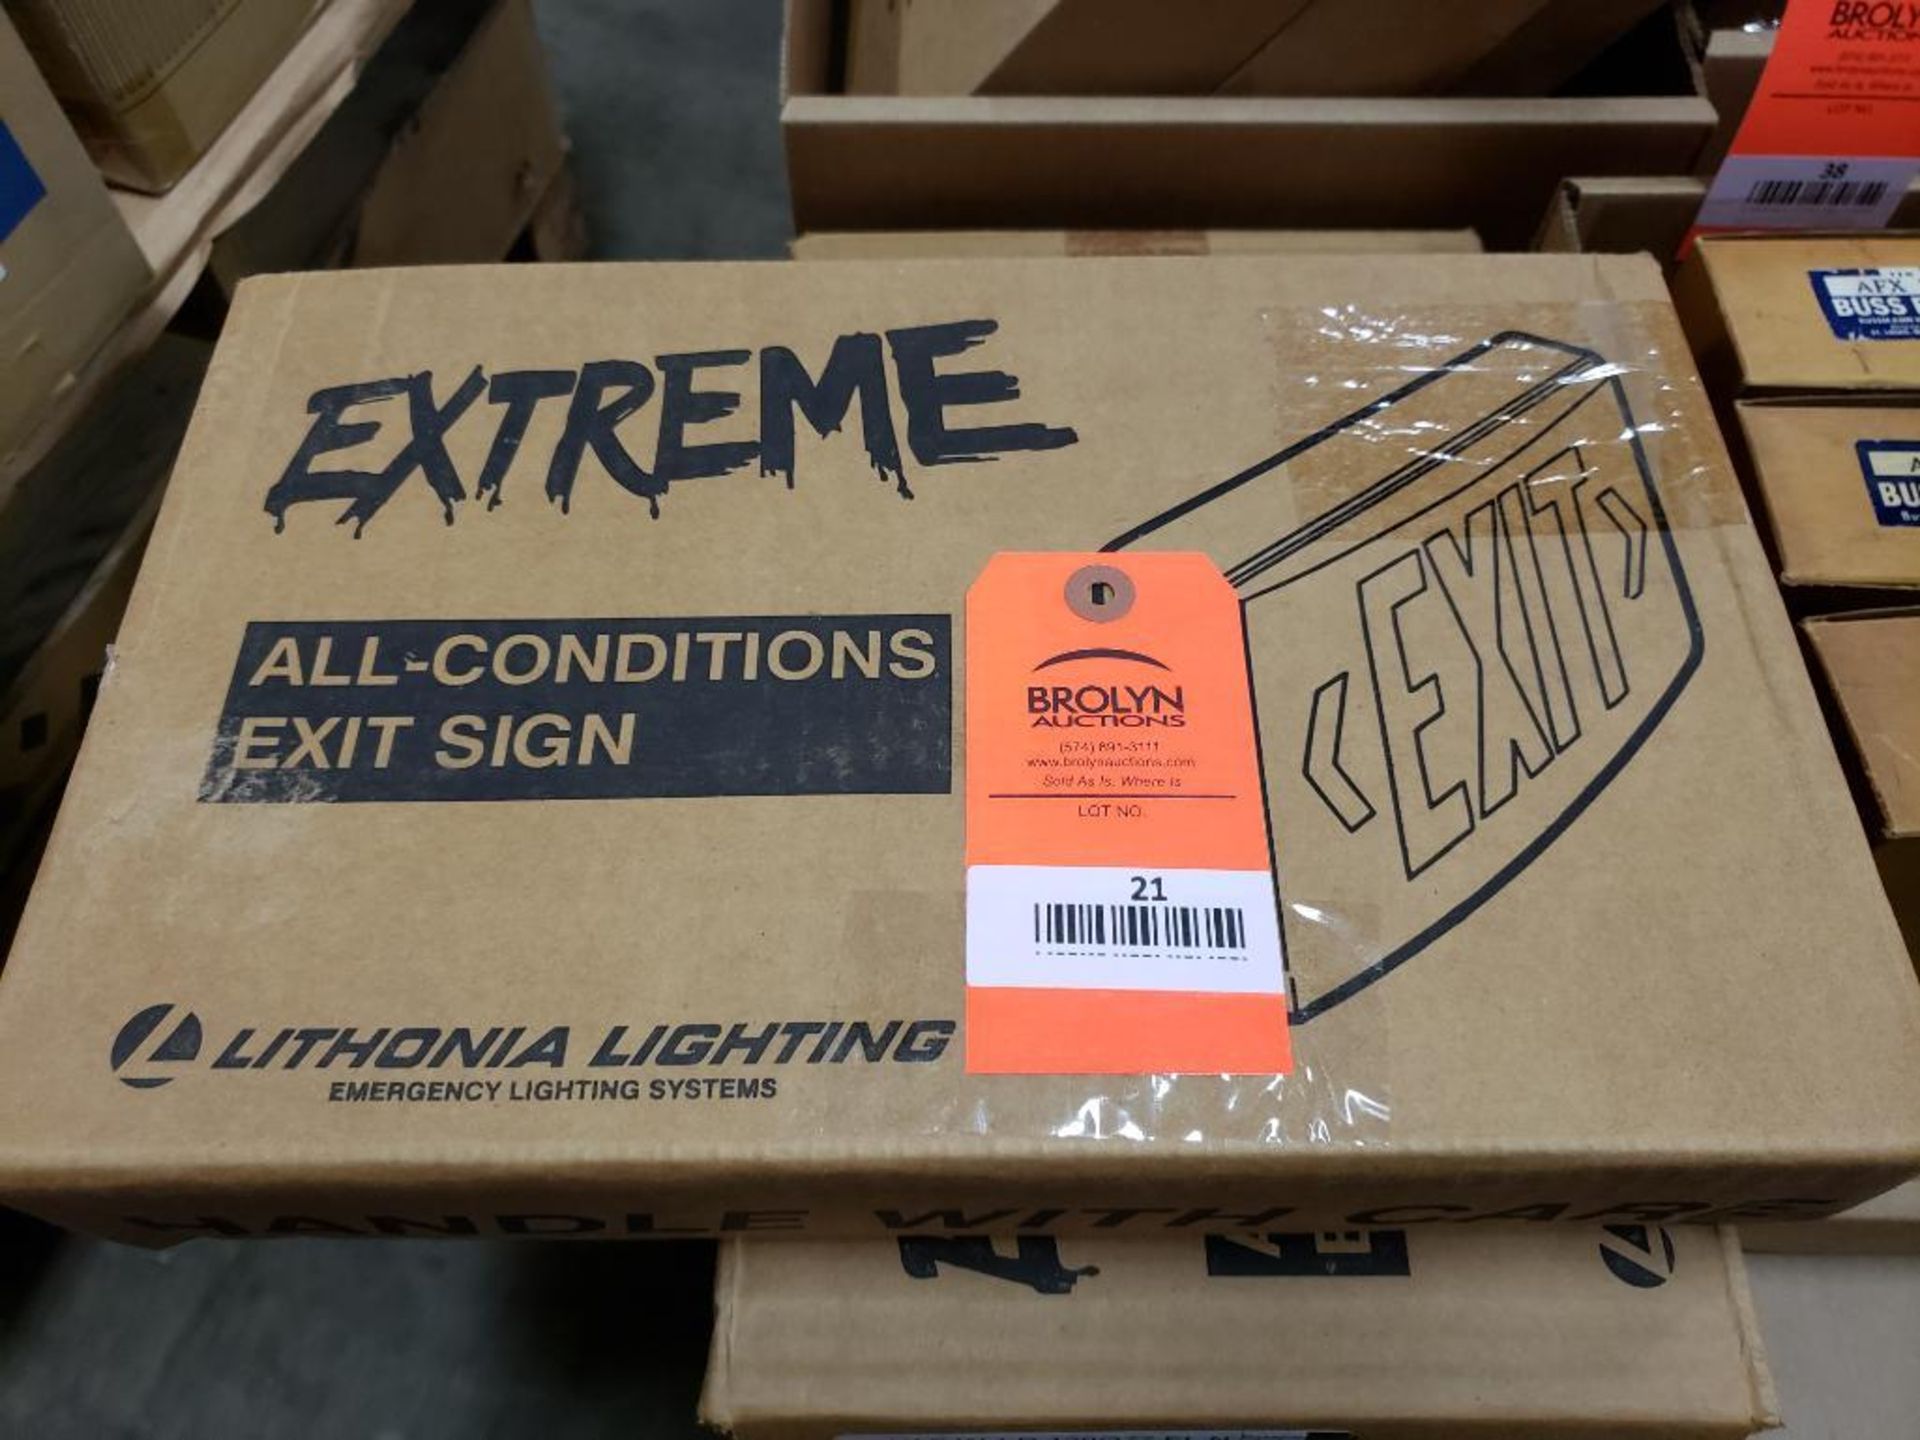 Lithonia Lighting LVSW1R 120/277 Extreme all conditions exit sign. New in box.